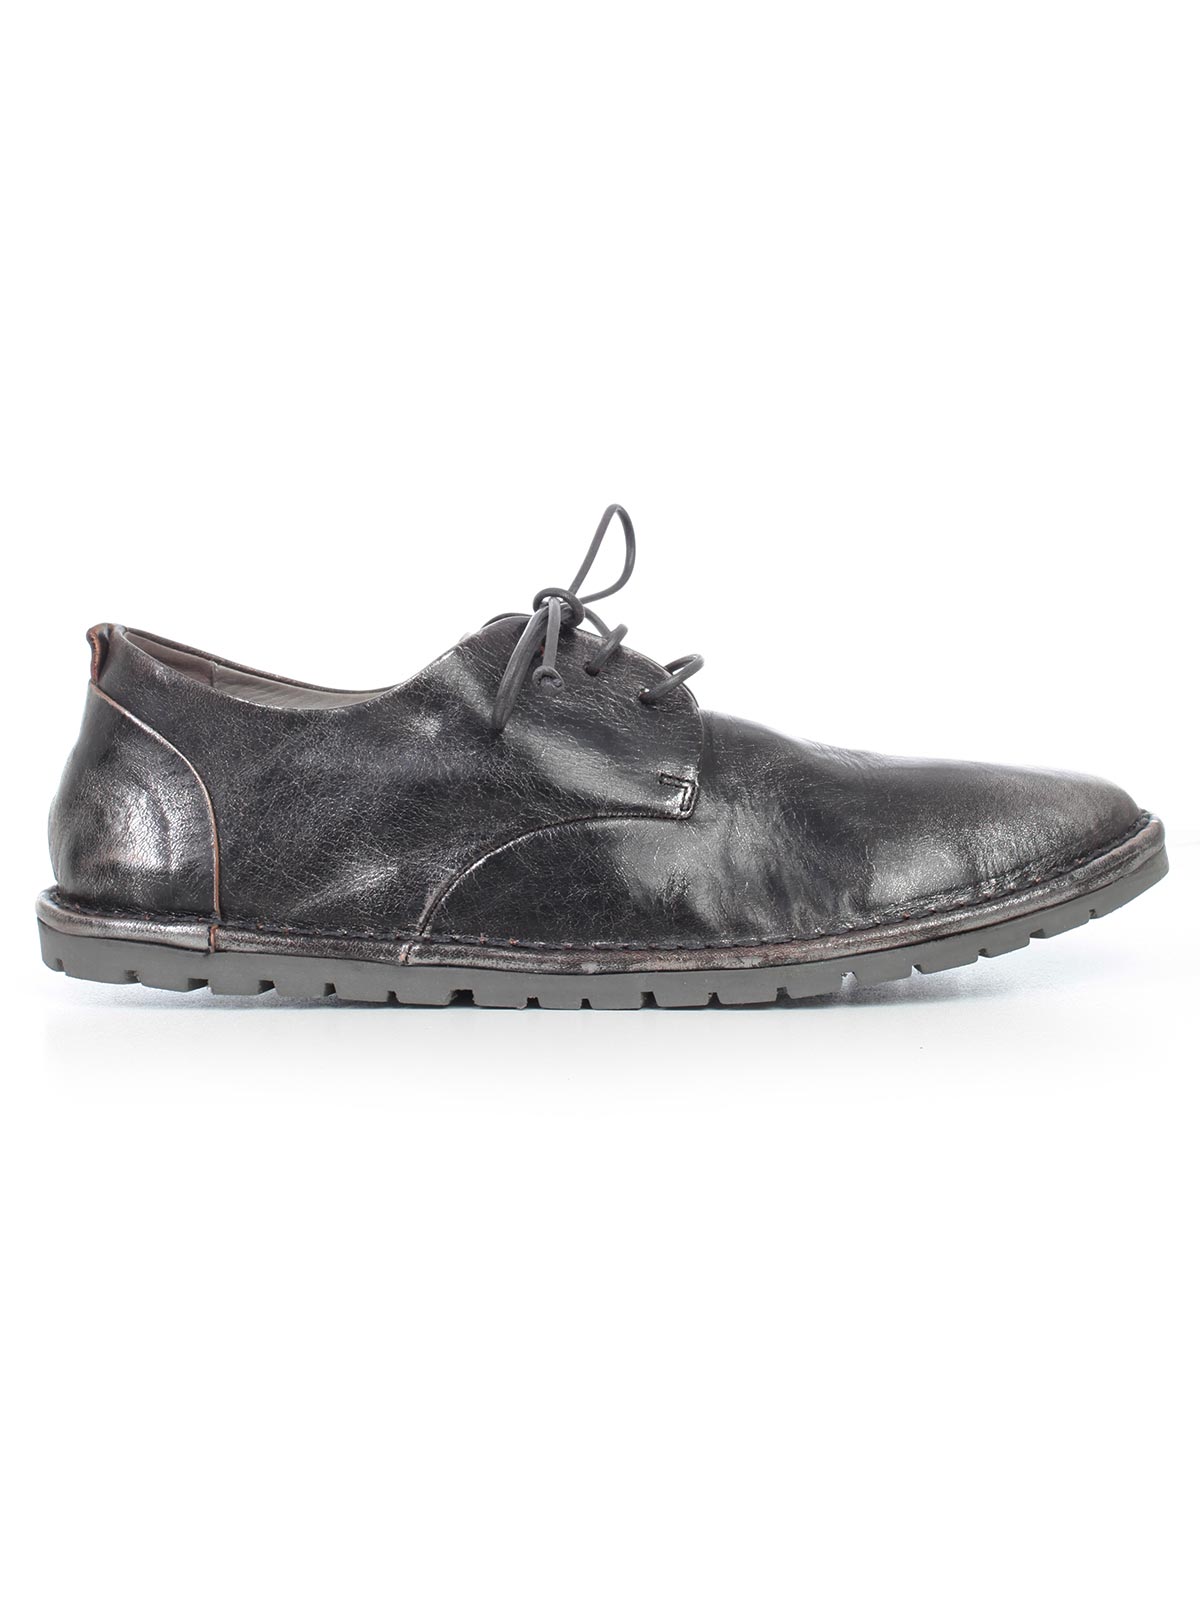 Marsell Shoes MMG002.3916 - ACCIAIO.Bernardelli Store - Online fashion  store for Men and Women